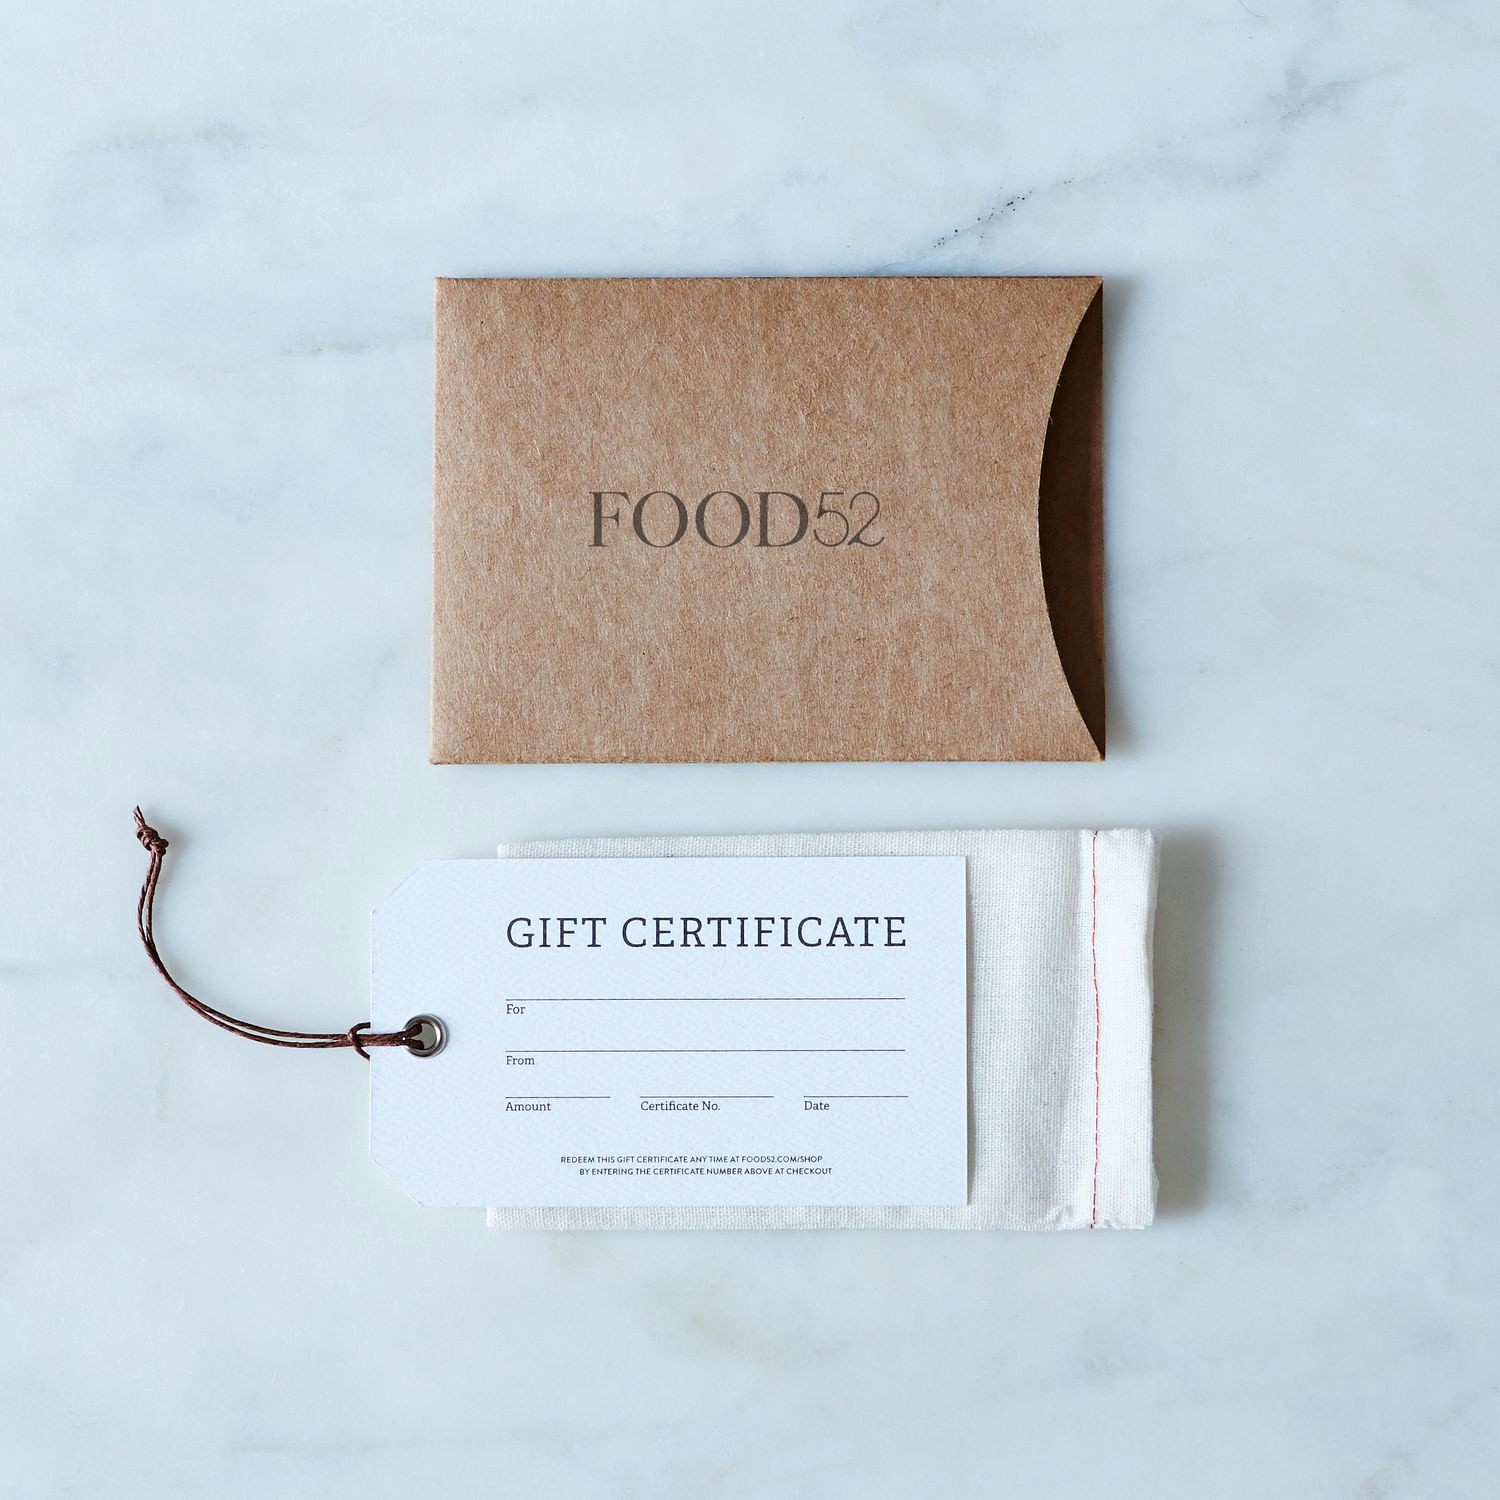 How to Make Gift Certificates Awesome Gift Cards On Food52